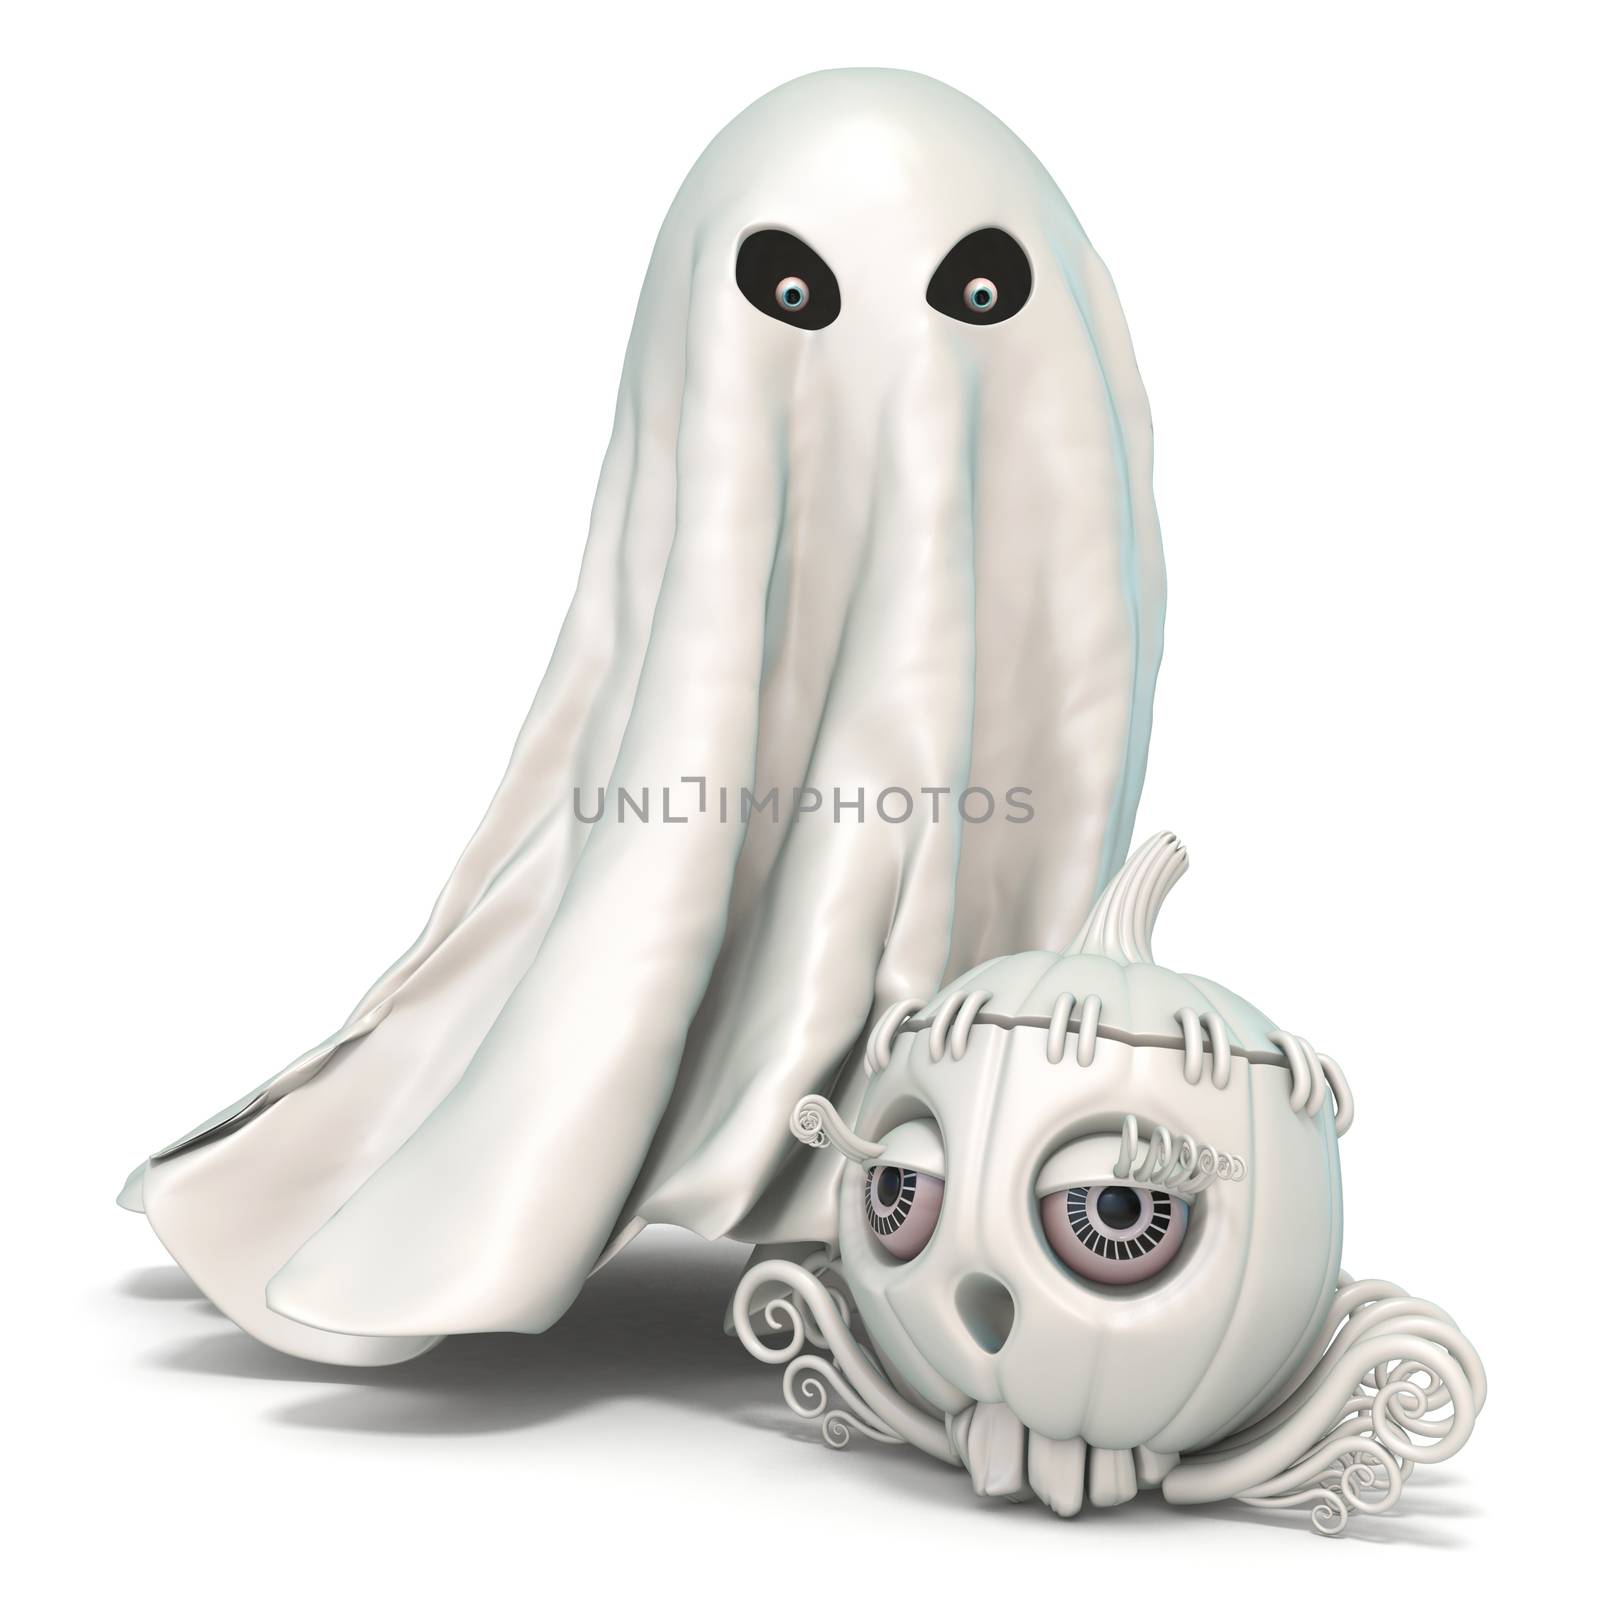 Ghost with Jack o Lantern 3D rendering illustration isolated on white background